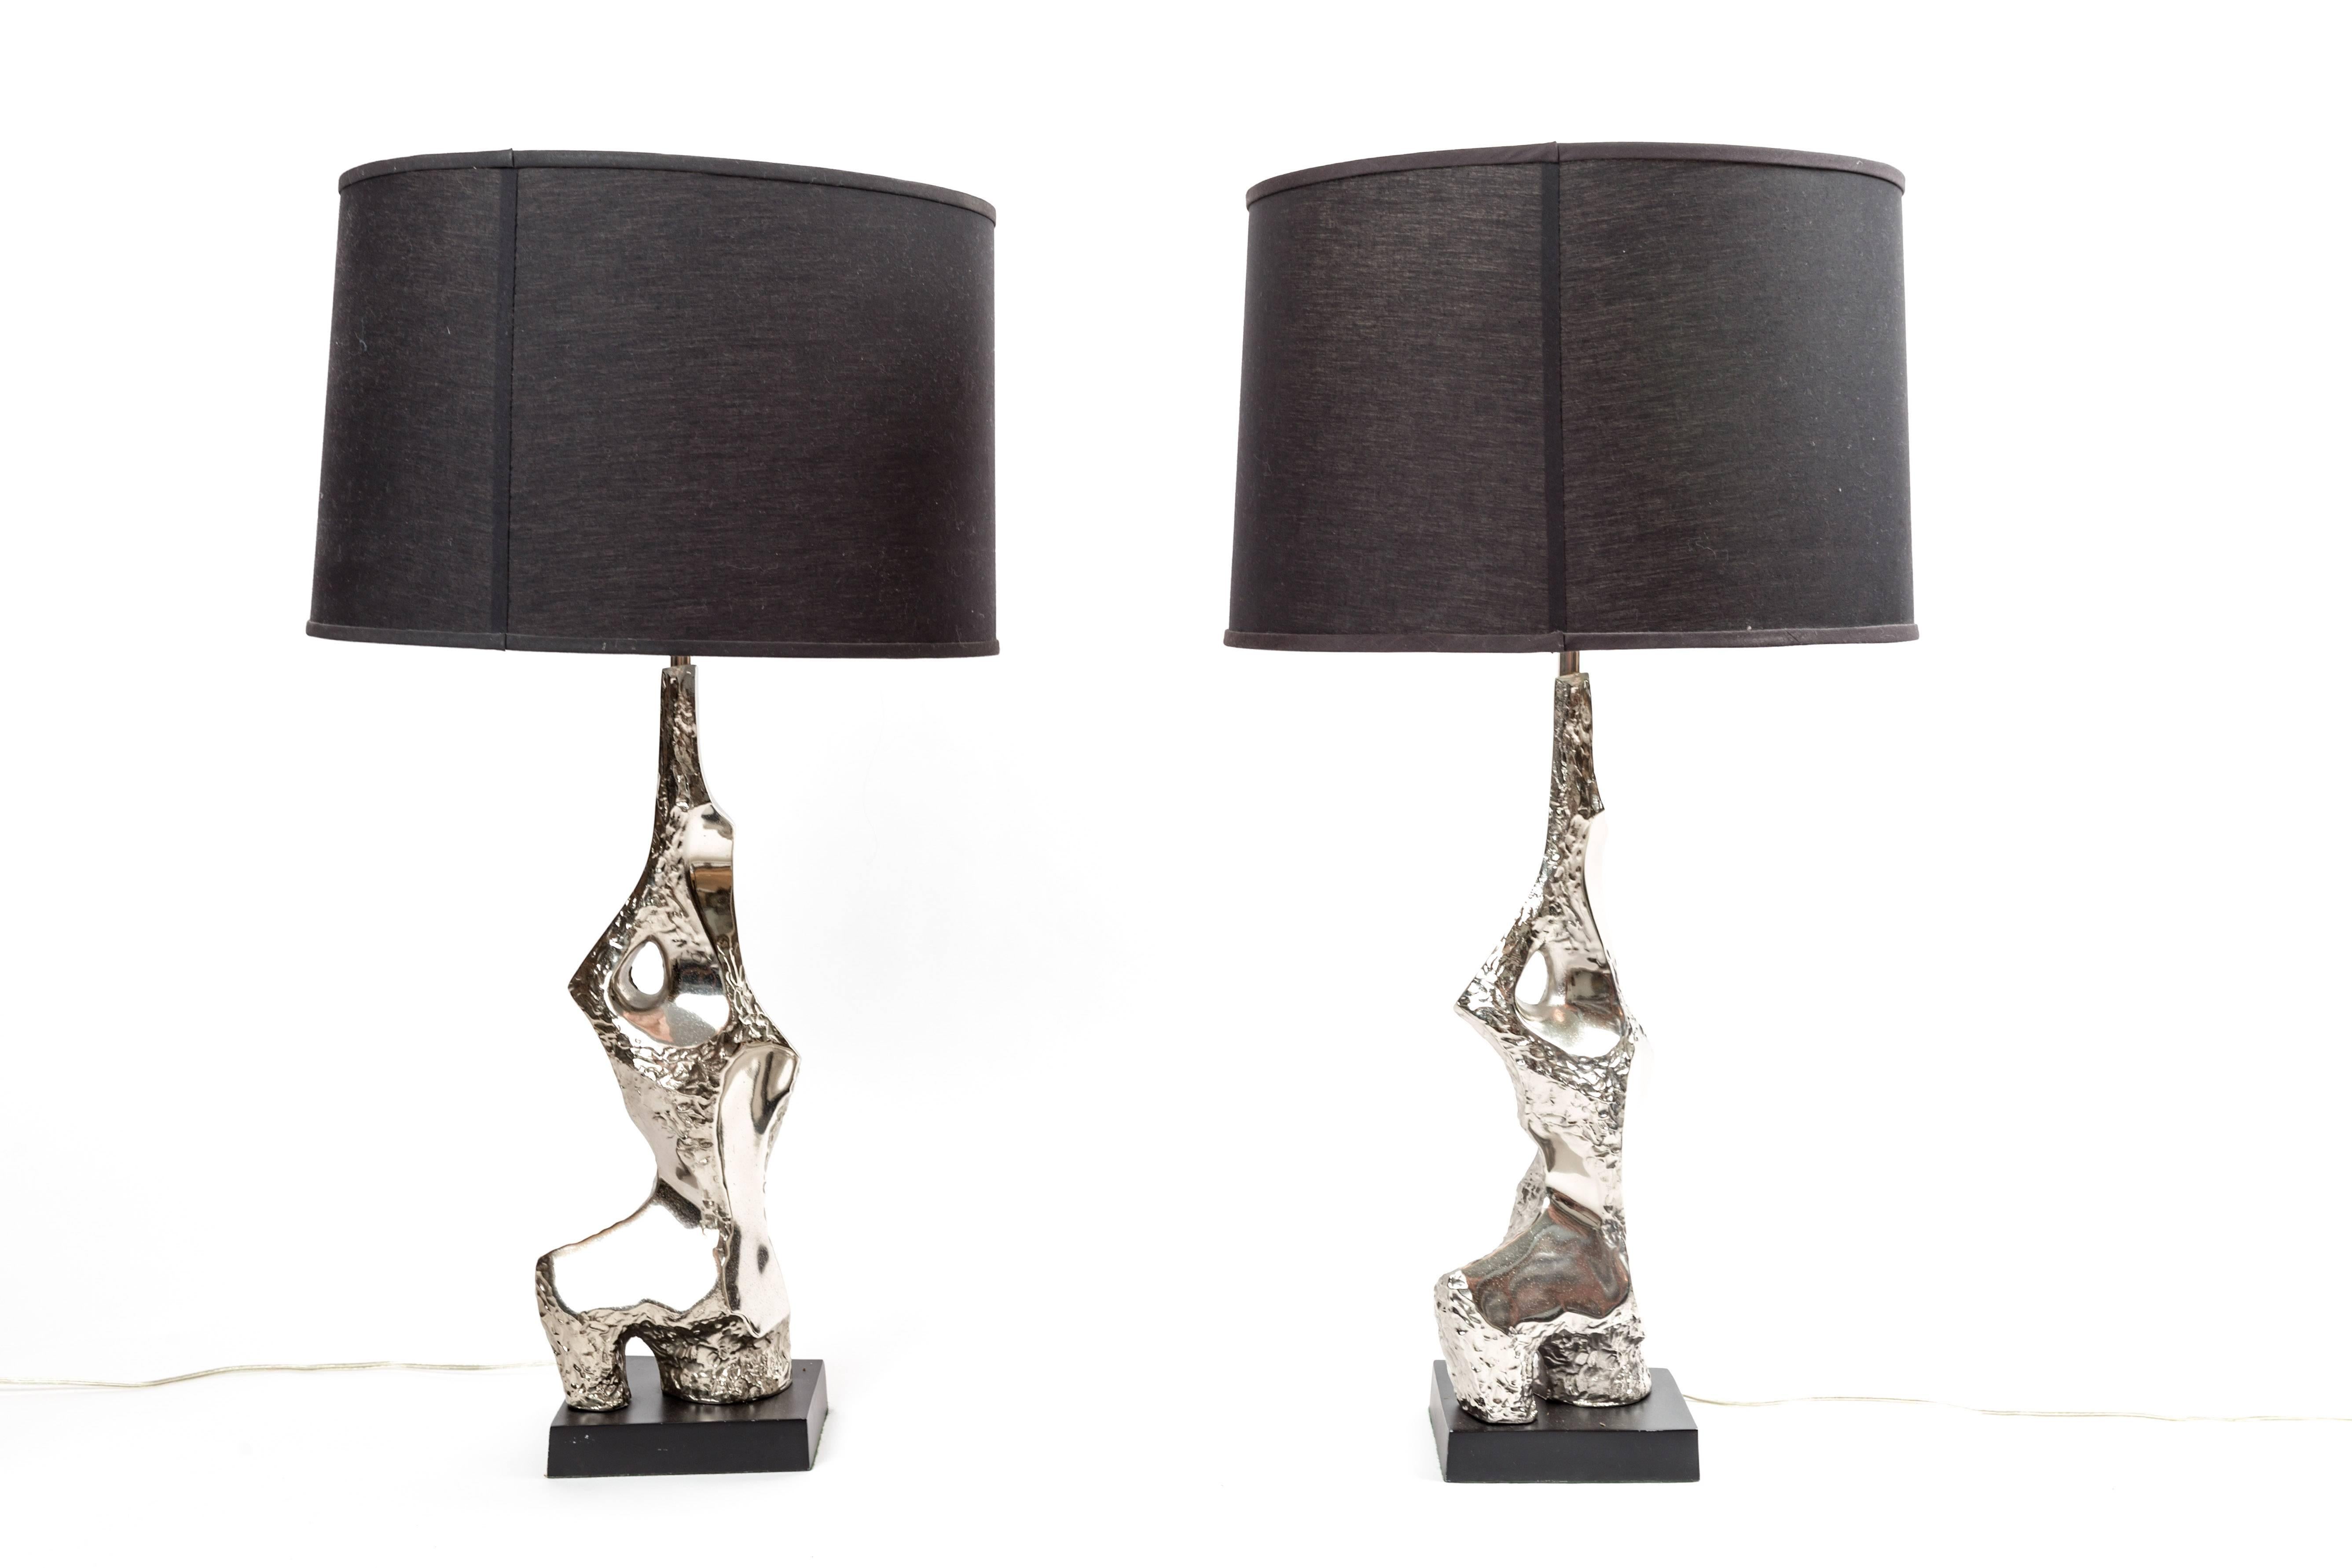 Pair of 1970s Silvered Brutalist Table Lamps by Richard Barr for Laurel Lamp Co. For Sale 3